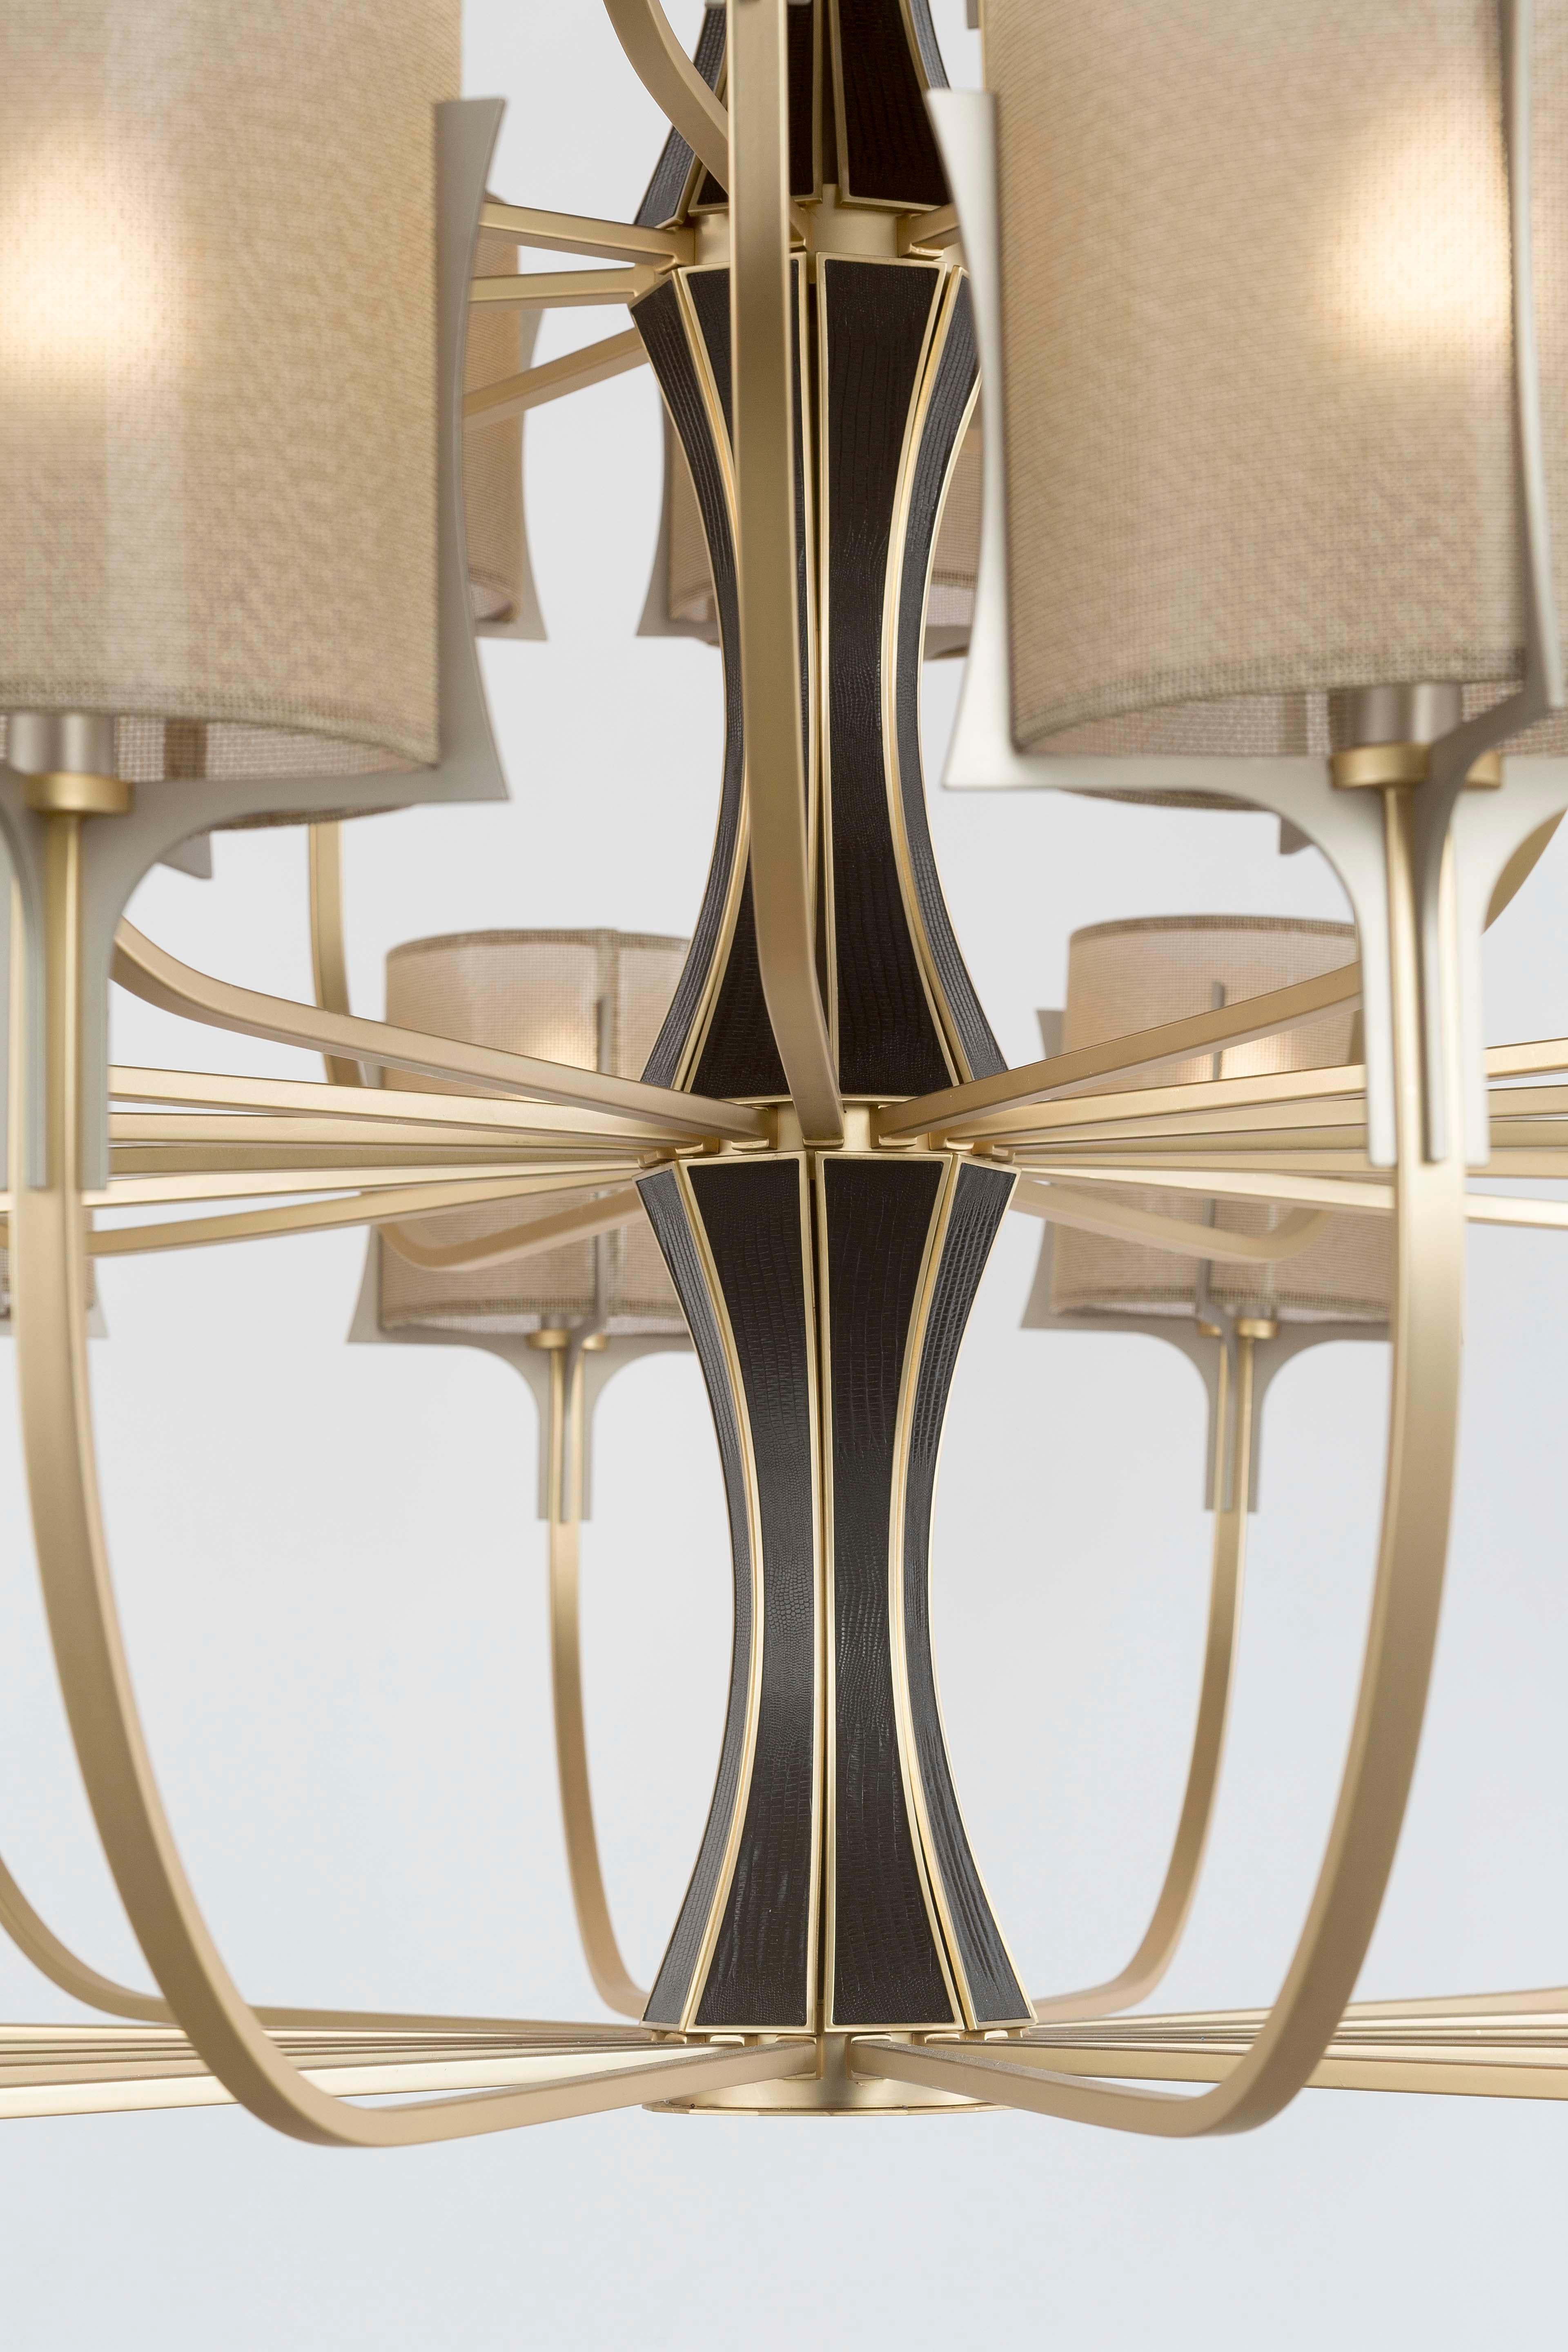 The New Flow collection combines high-quality materials with a modern sensibility for a timeless final effect that makes this piece suitable for any decor. The four-layer structure is in gold finish with details in nickel finish and is supported by